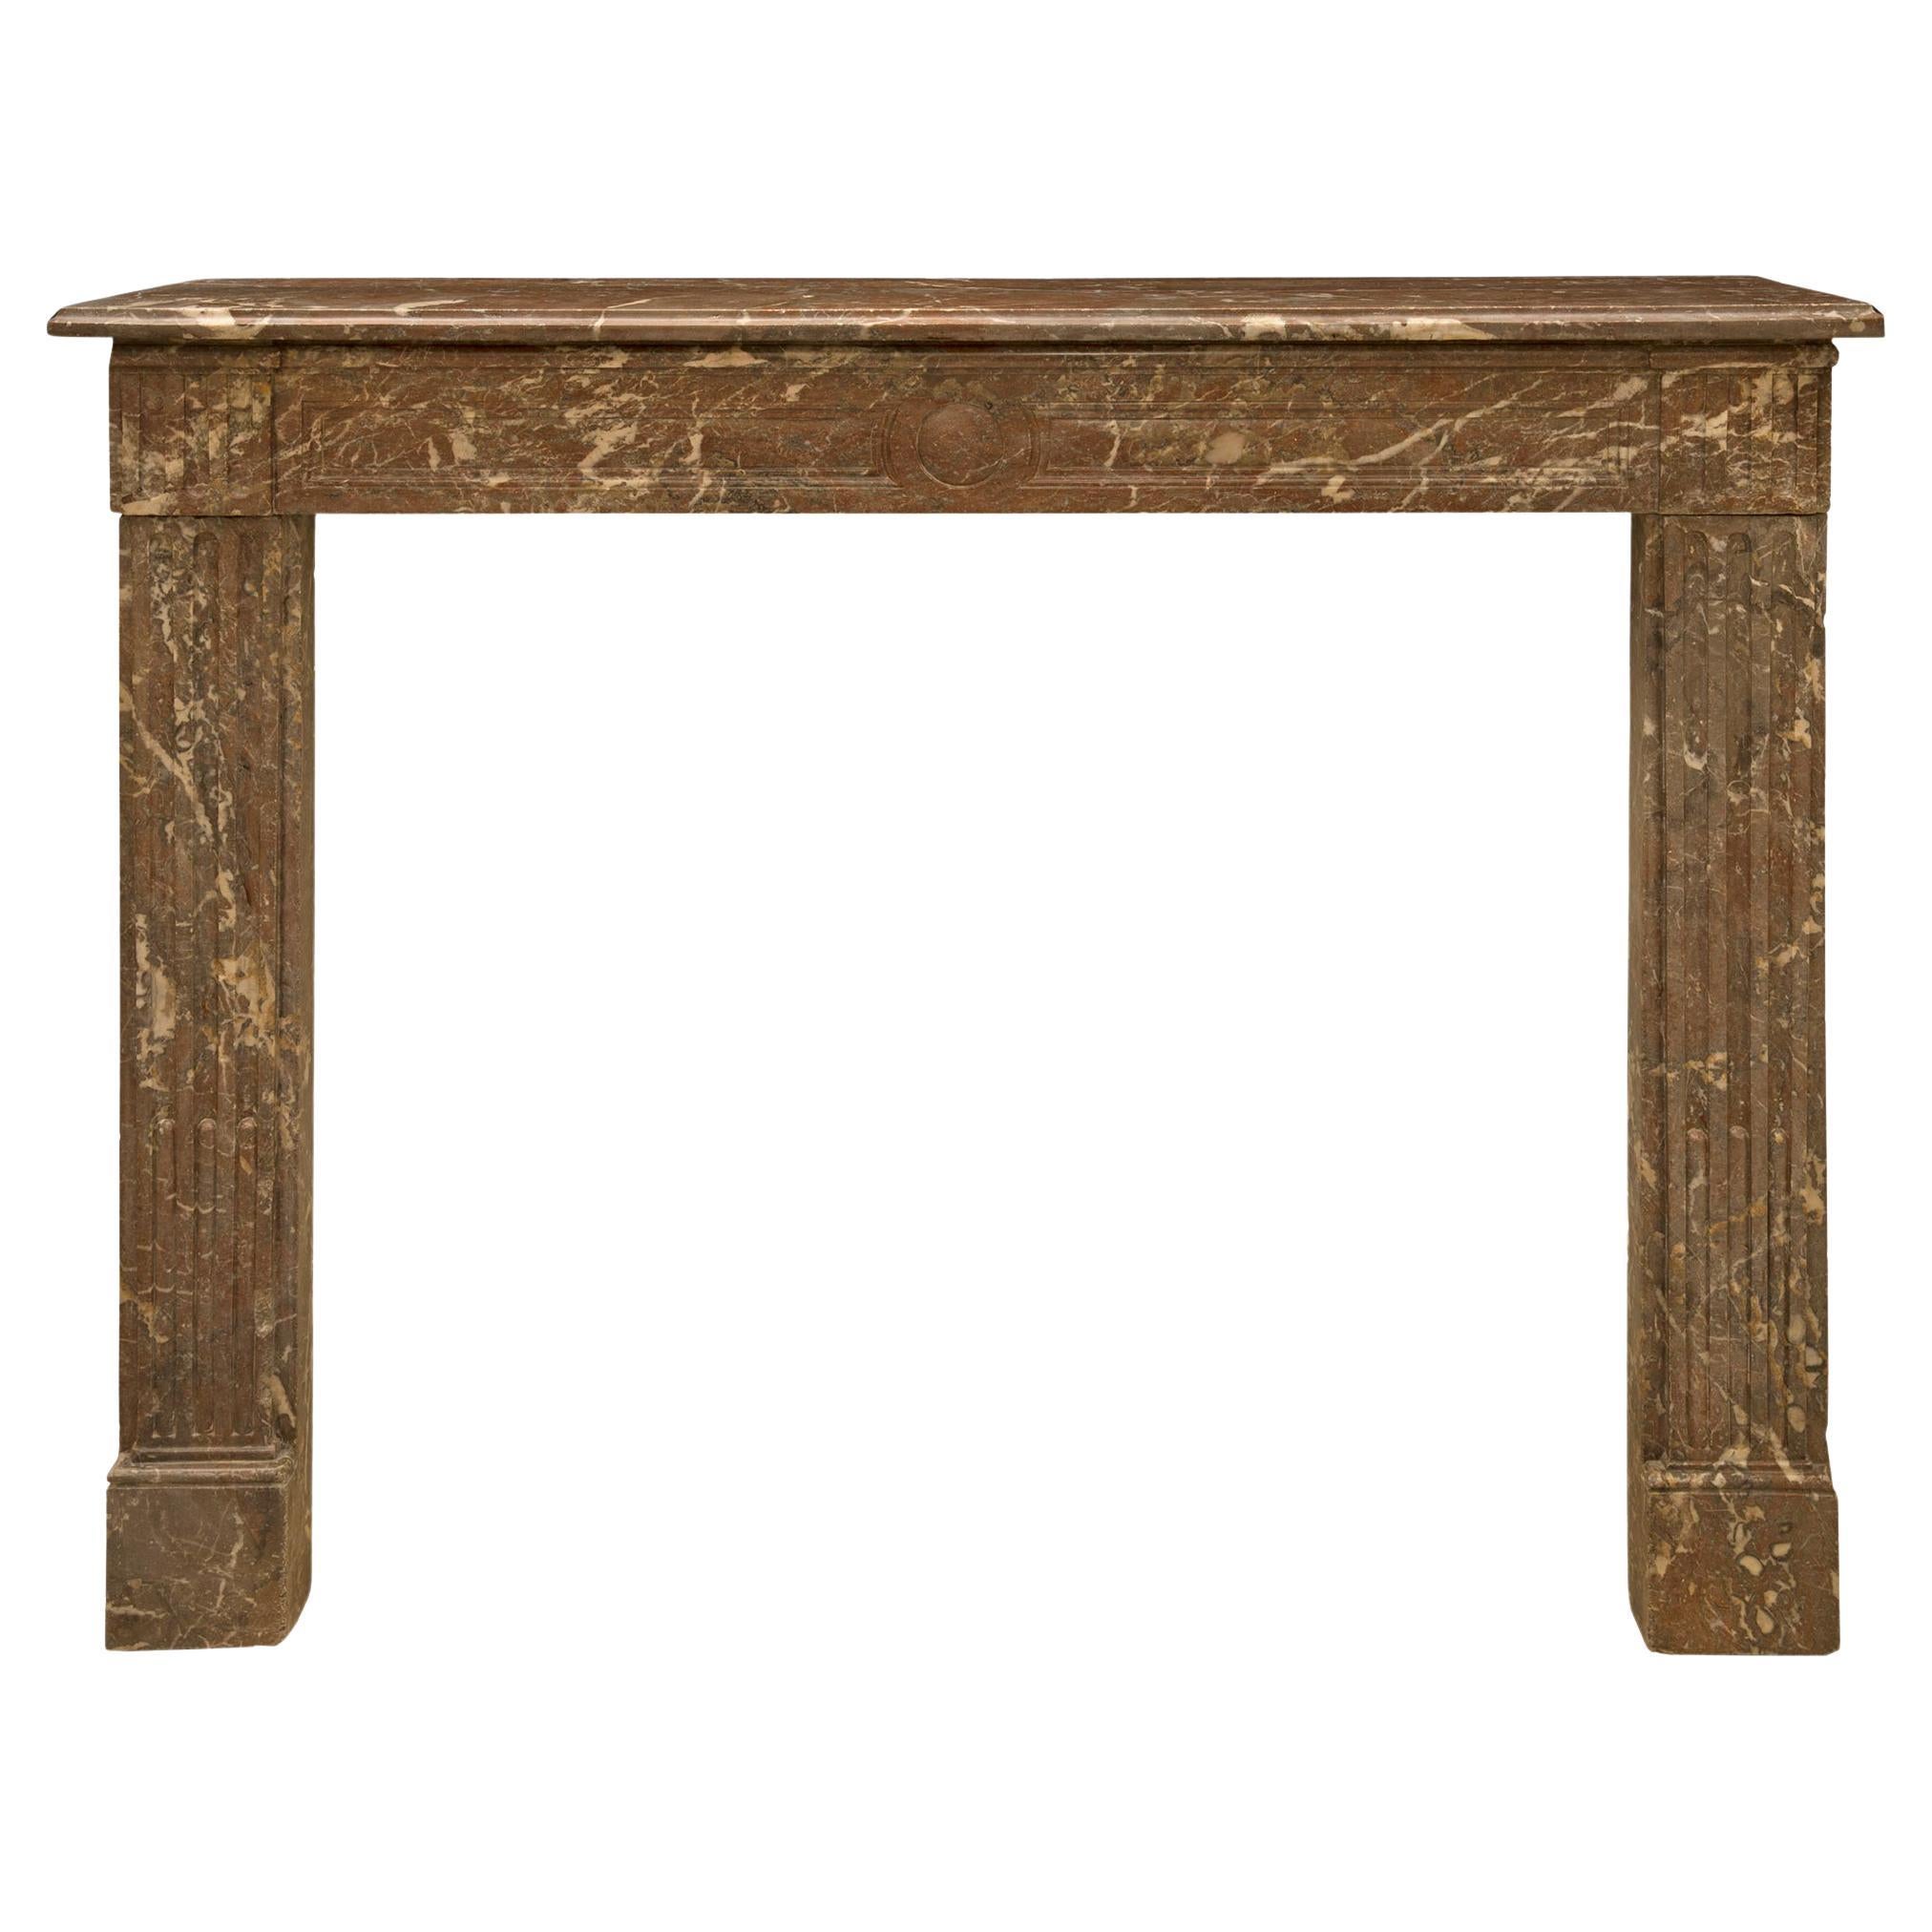 French 19th Century Louis XVI Style Rouge Catalan Marble Fireplace Mantel For Sale